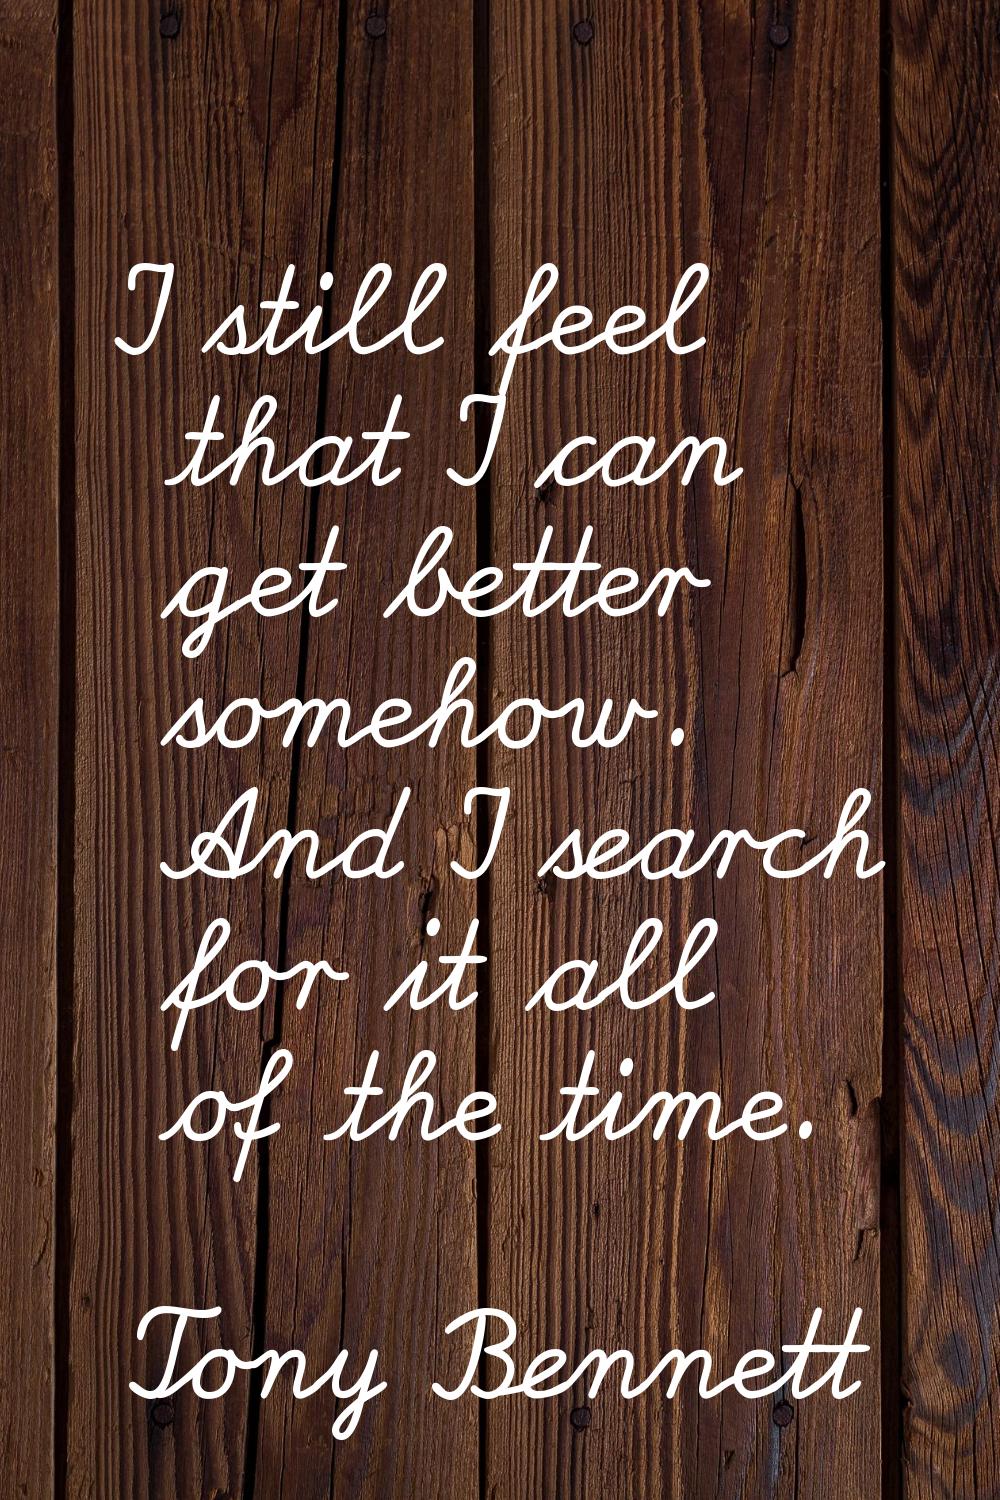 I still feel that I can get better somehow. And I search for it all of the time.